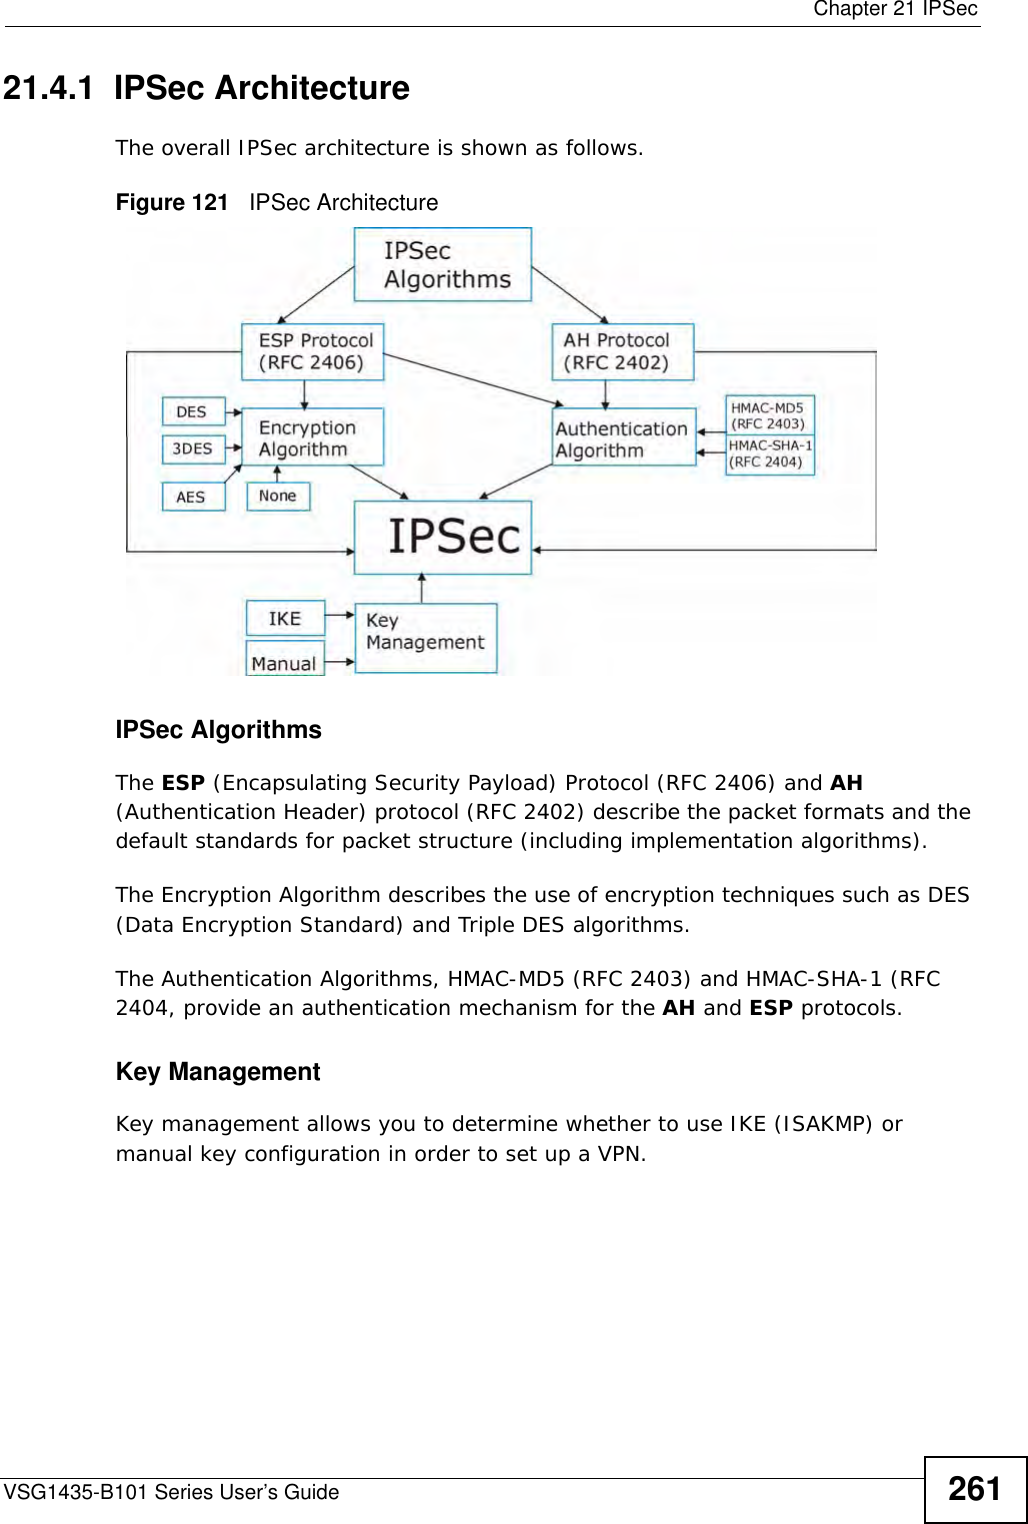  Chapter 21 IPSecVSG1435-B101 Series User’s Guide 26121.4.1  IPSec ArchitectureThe overall IPSec architecture is shown as follows.Figure 121   IPSec ArchitectureIPSec AlgorithmsThe ESP (Encapsulating Security Payload) Protocol (RFC 2406) and AH (Authentication Header) protocol (RFC 2402) describe the packet formats and the default standards for packet structure (including implementation algorithms).The Encryption Algorithm describes the use of encryption techniques such as DES (Data Encryption Standard) and Triple DES algorithms.The Authentication Algorithms, HMAC-MD5 (RFC 2403) and HMAC-SHA-1 (RFC 2404, provide an authentication mechanism for the AH and ESP protocols. Key ManagementKey management allows you to determine whether to use IKE (ISAKMP) or manual key configuration in order to set up a VPN.